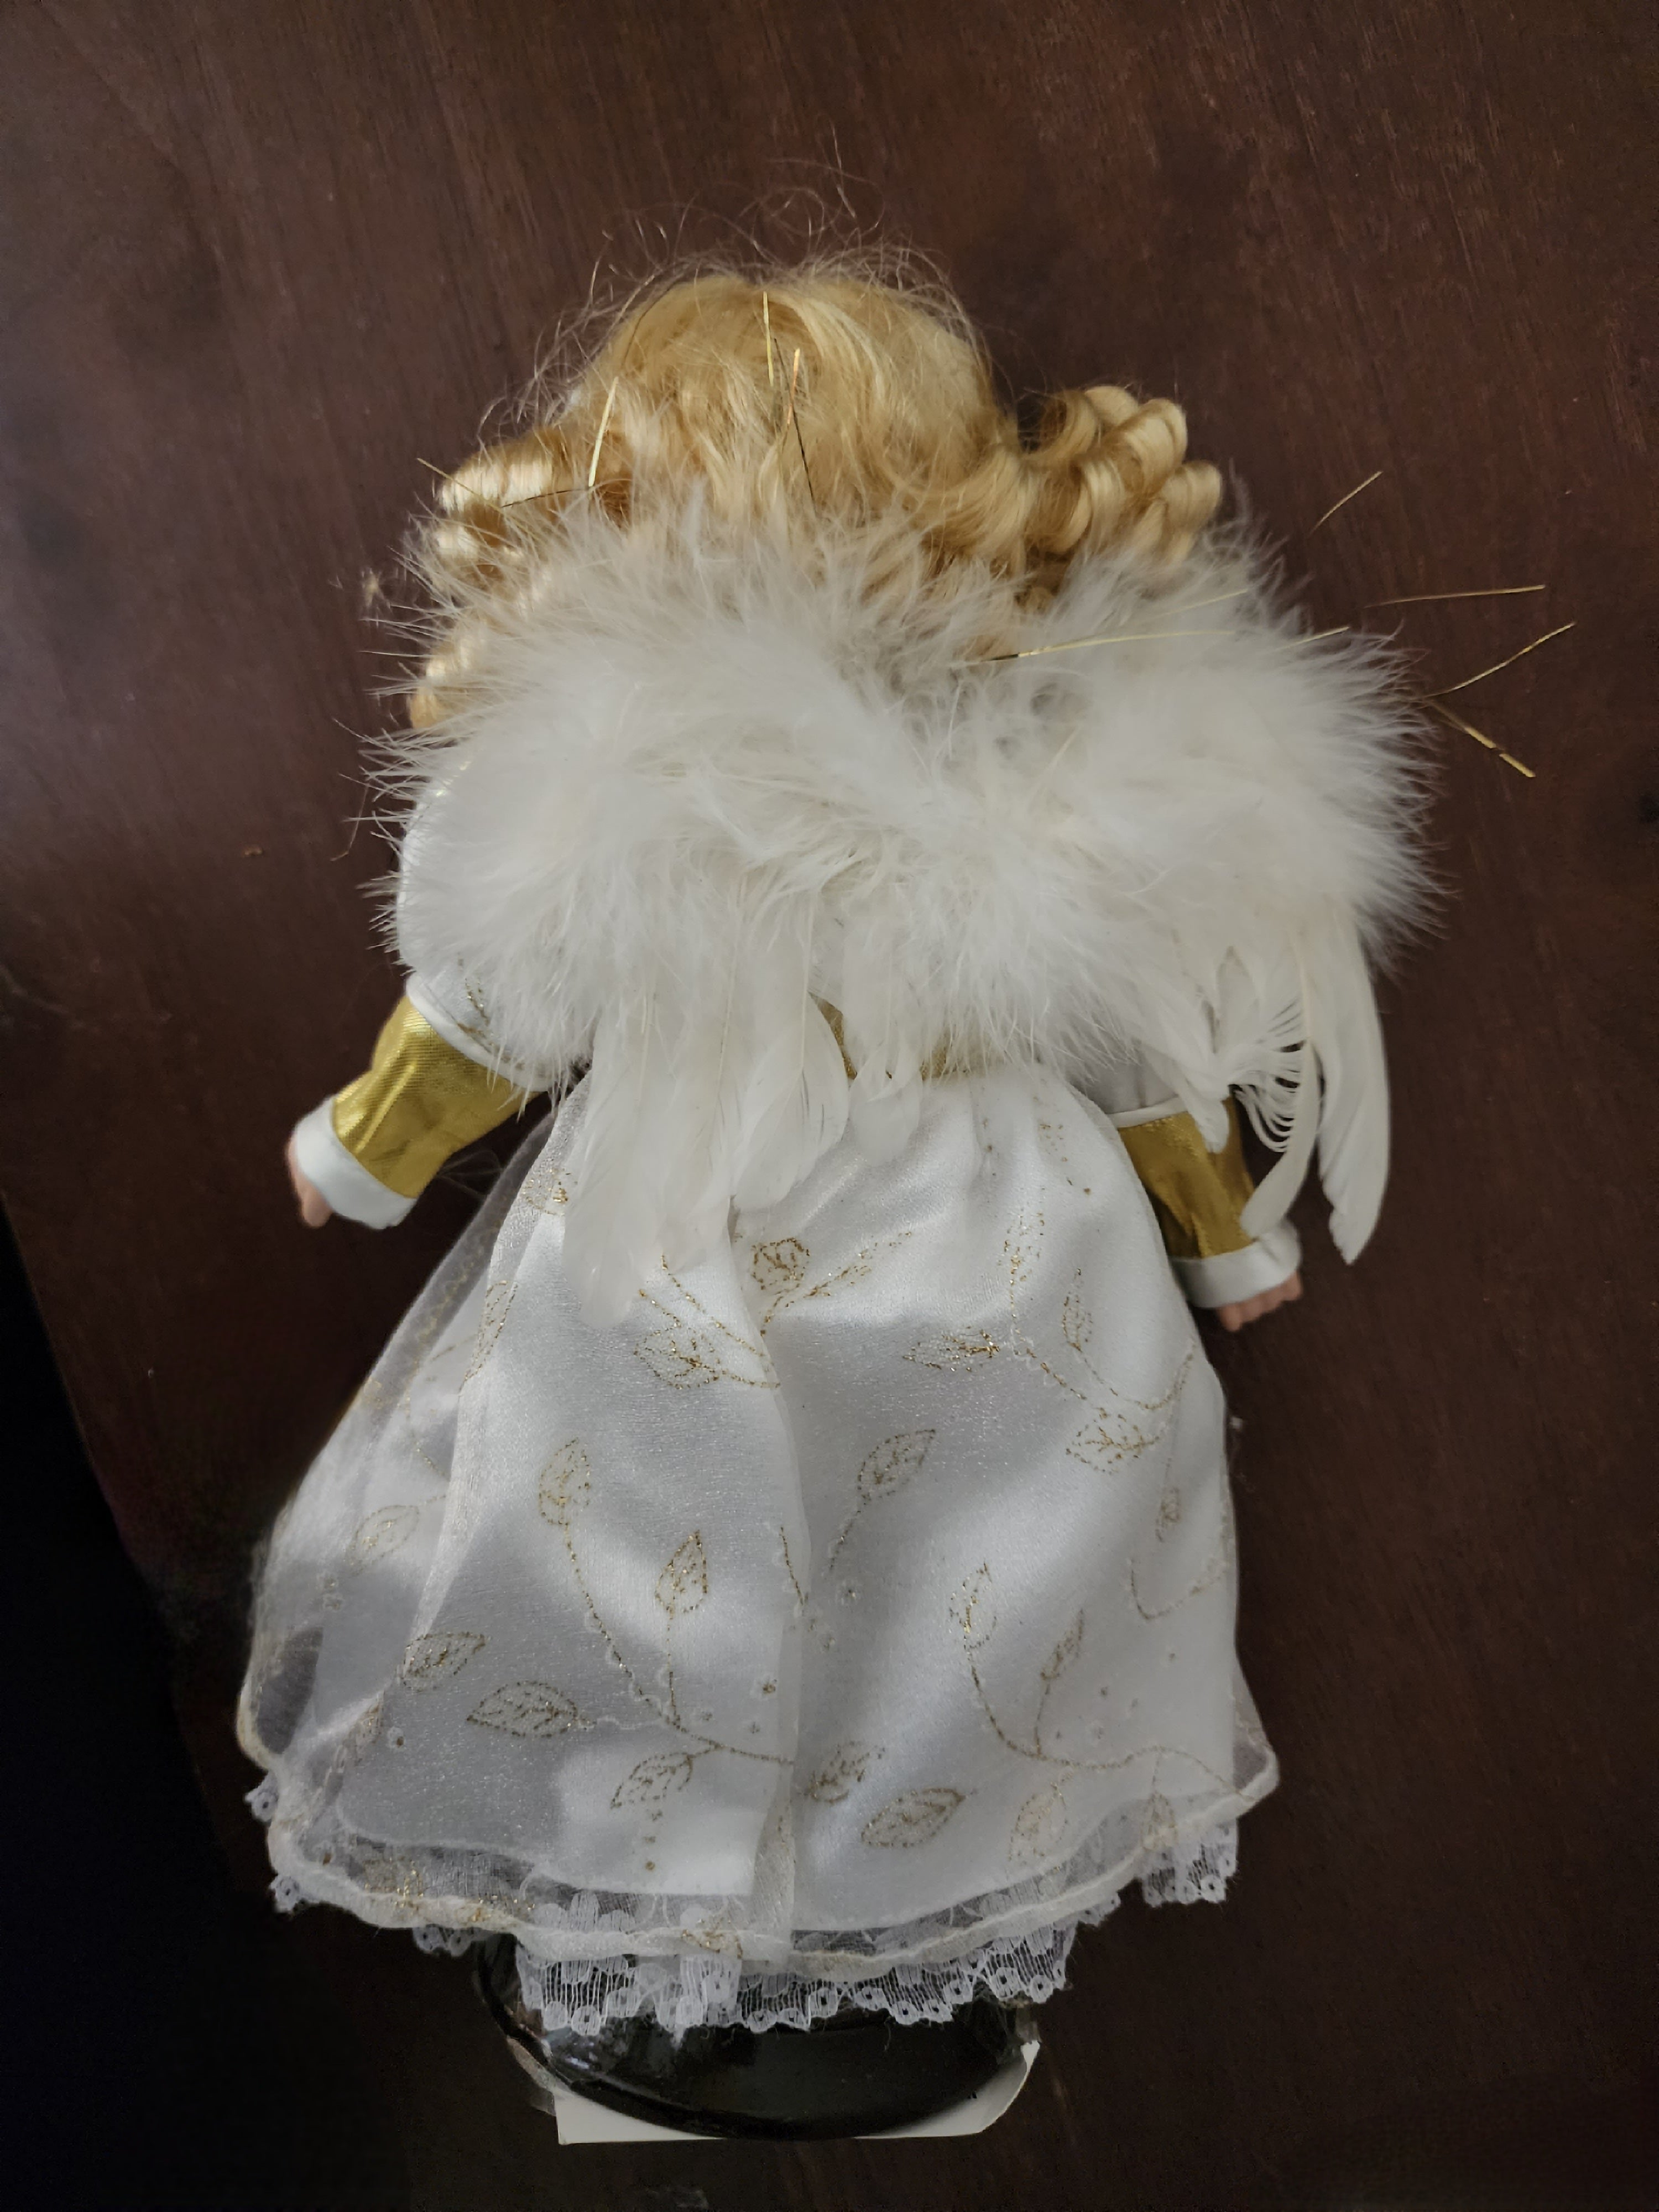 Harlow - Lightworker Spirit Attached to Angel Doll Vessel